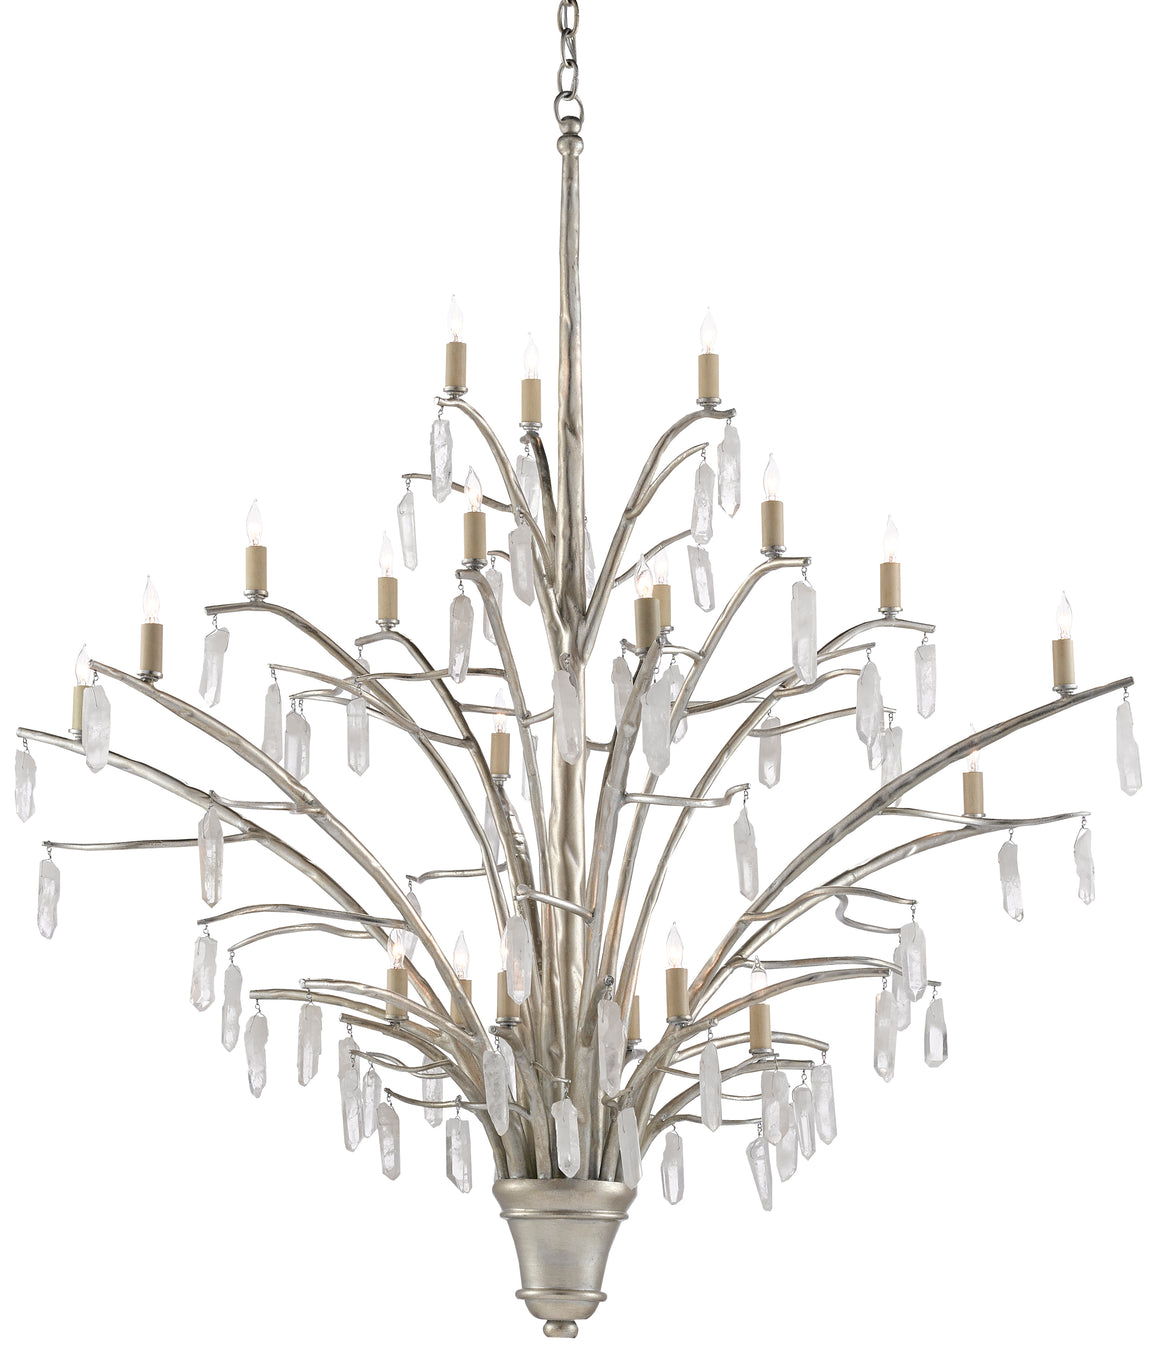 Currey and Company Raux Chandelier